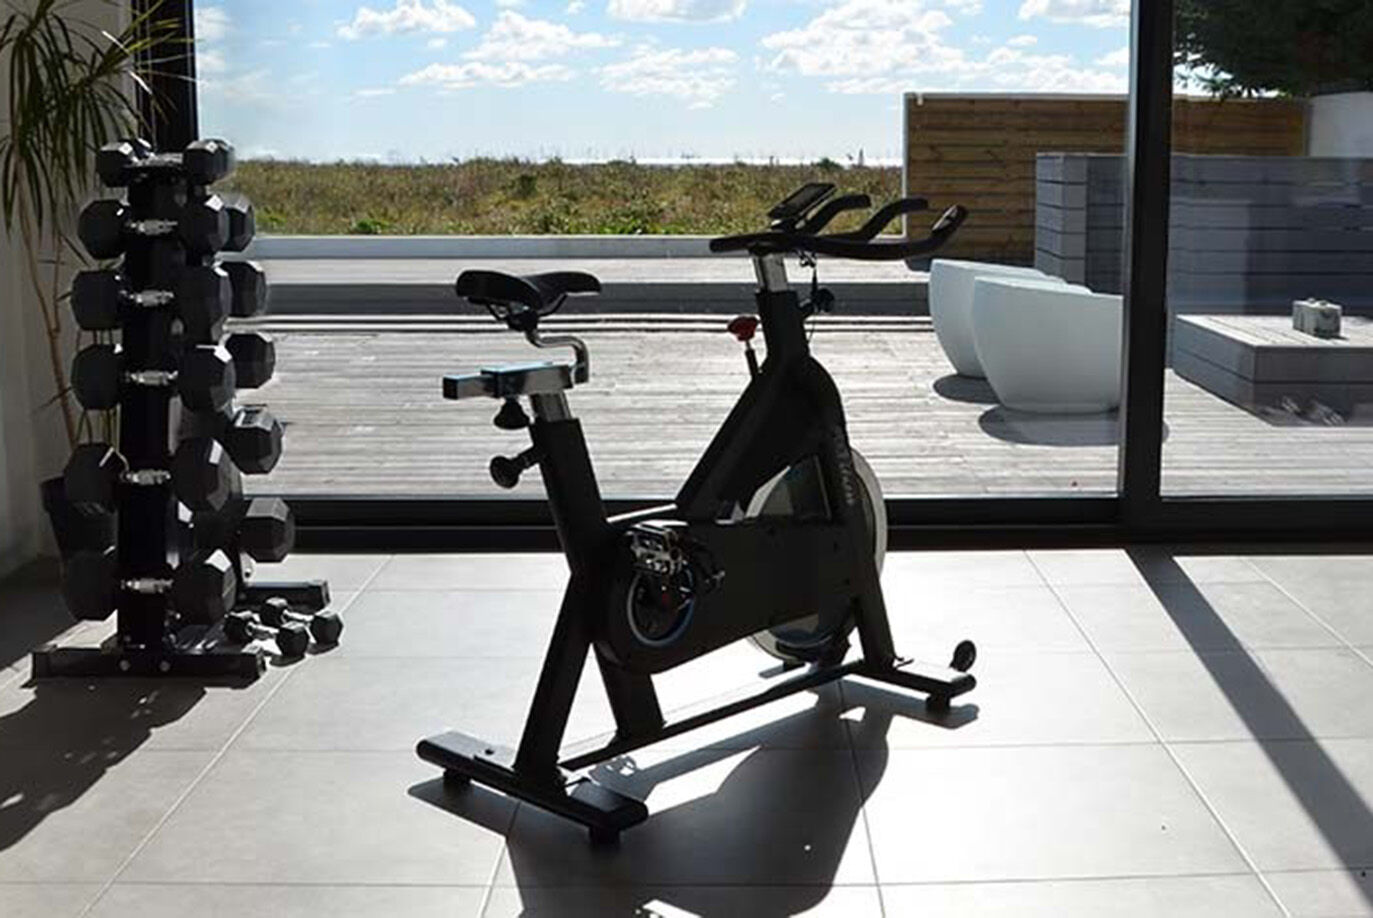 Stylish Dumbbell Rack For Your Home or Commercial Gym